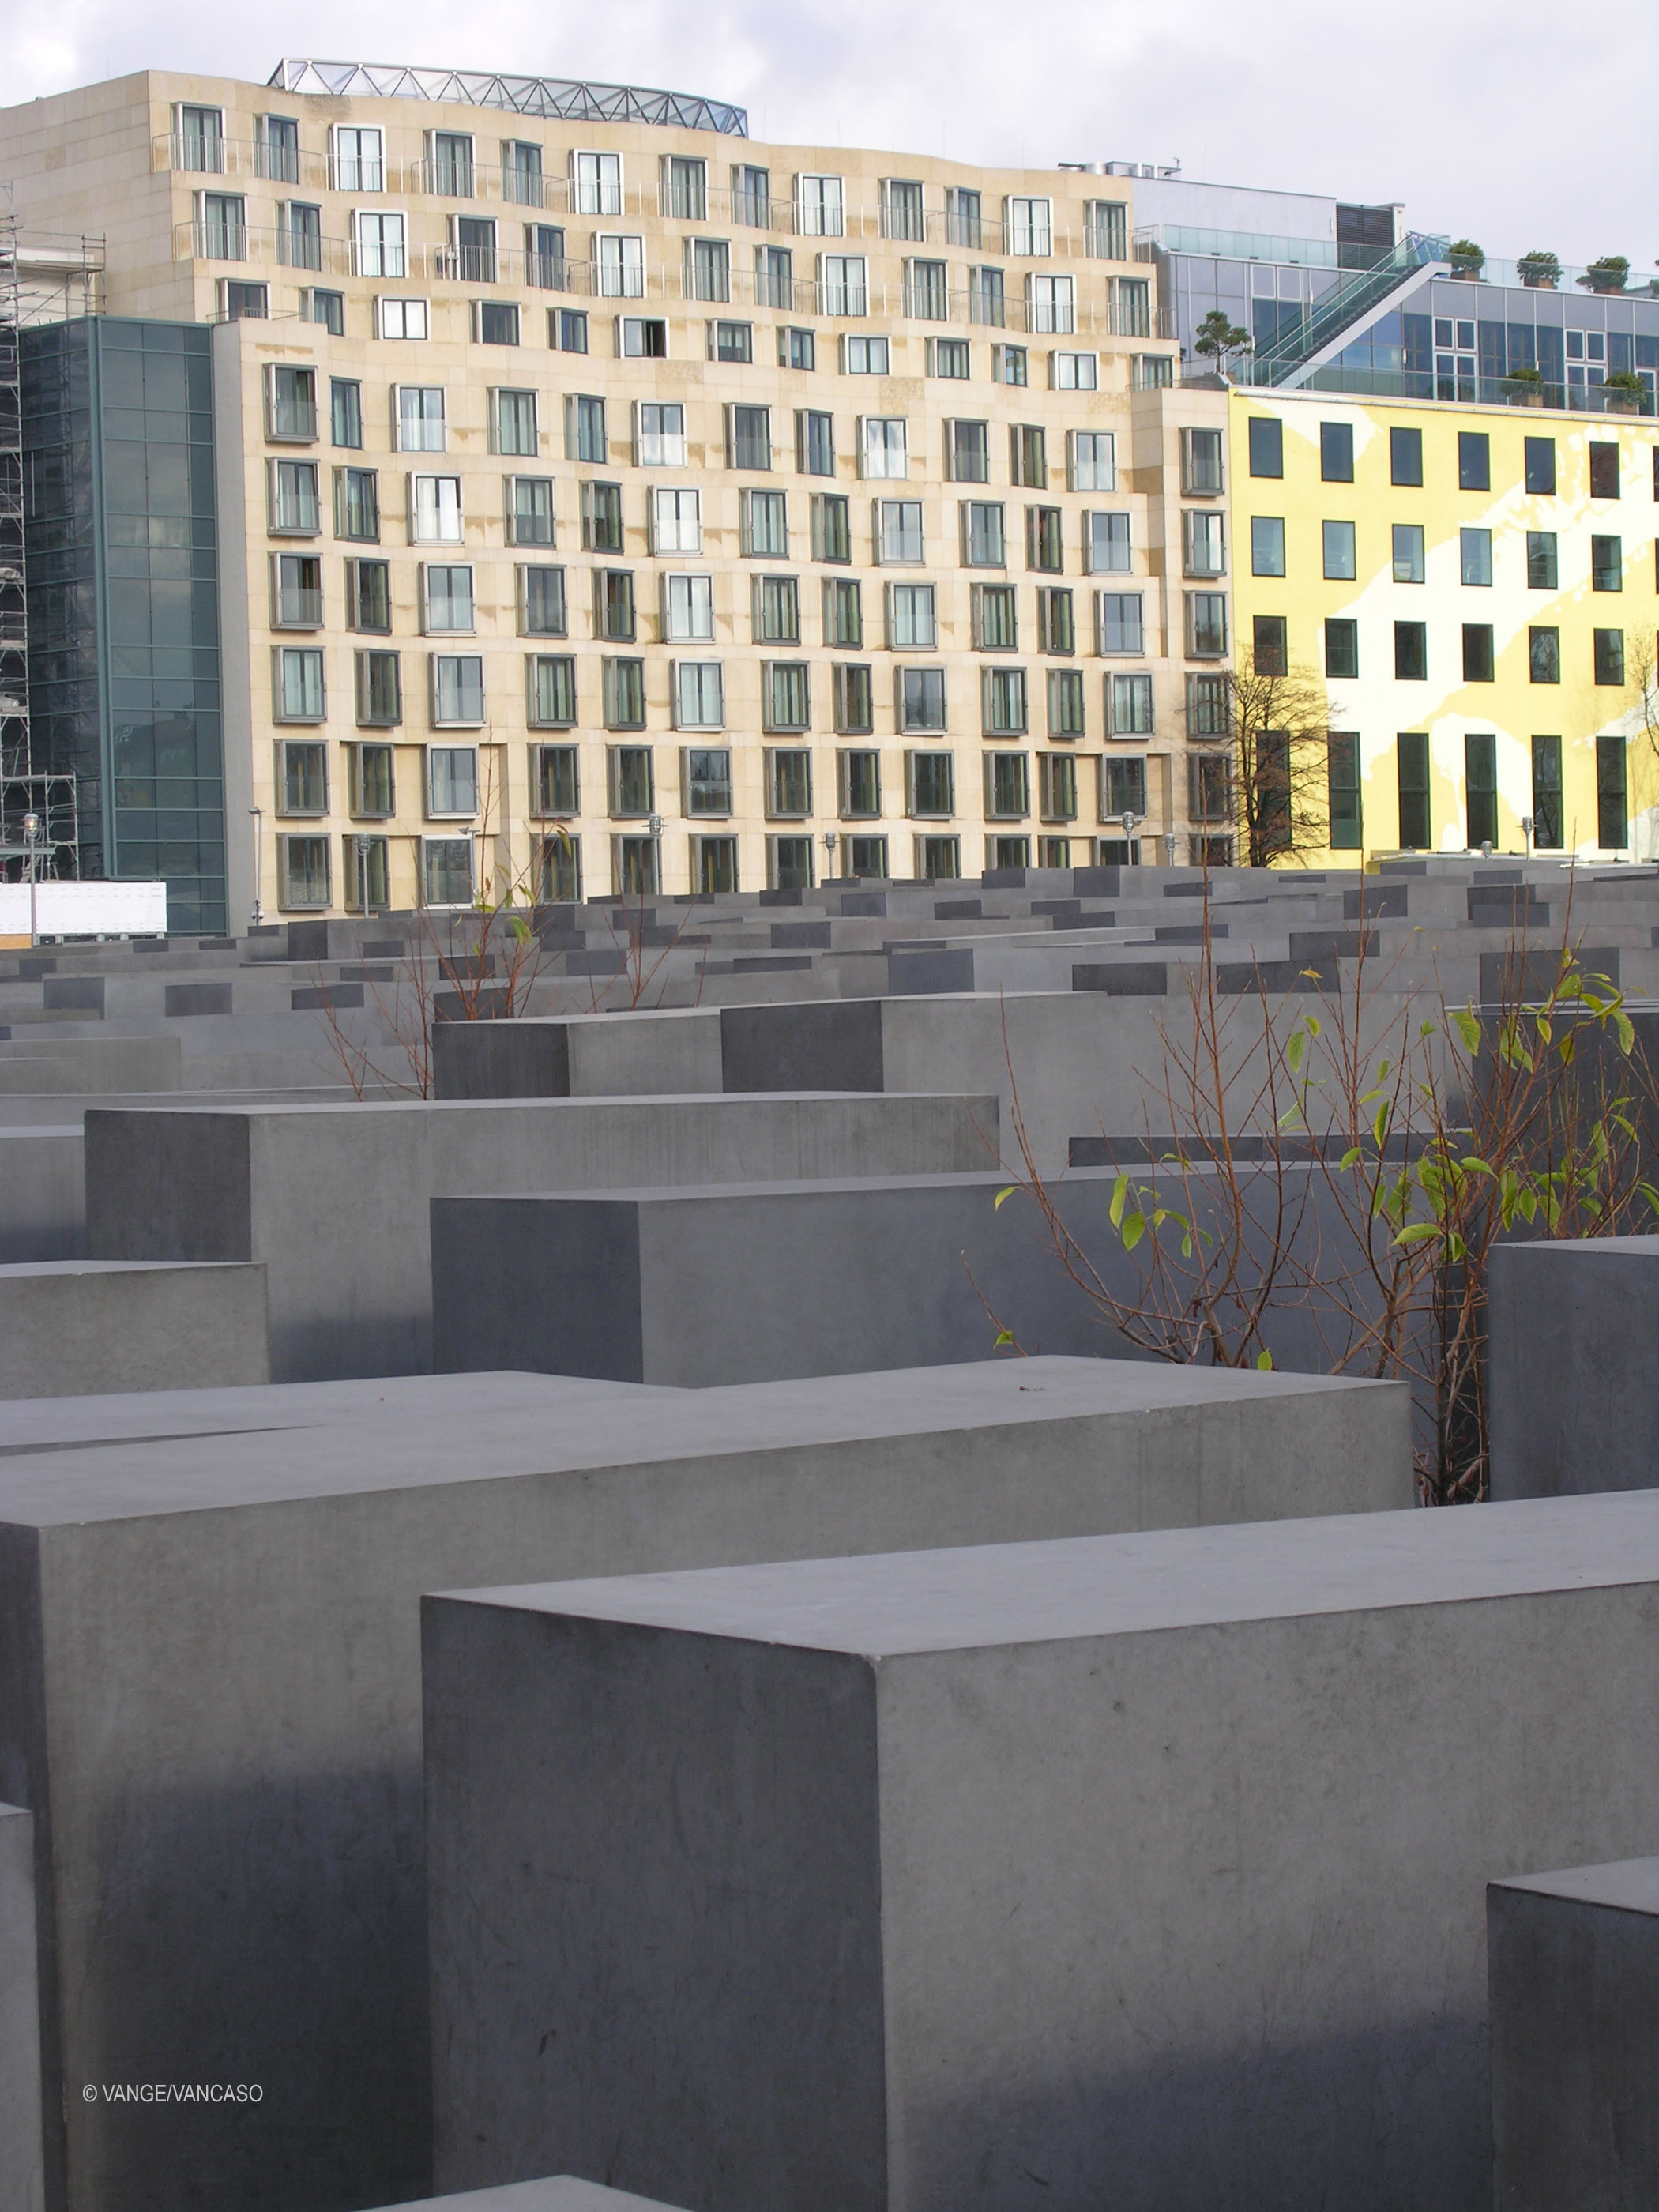 Memorial to the Murdered Jews of Europe in Berlin, Germany